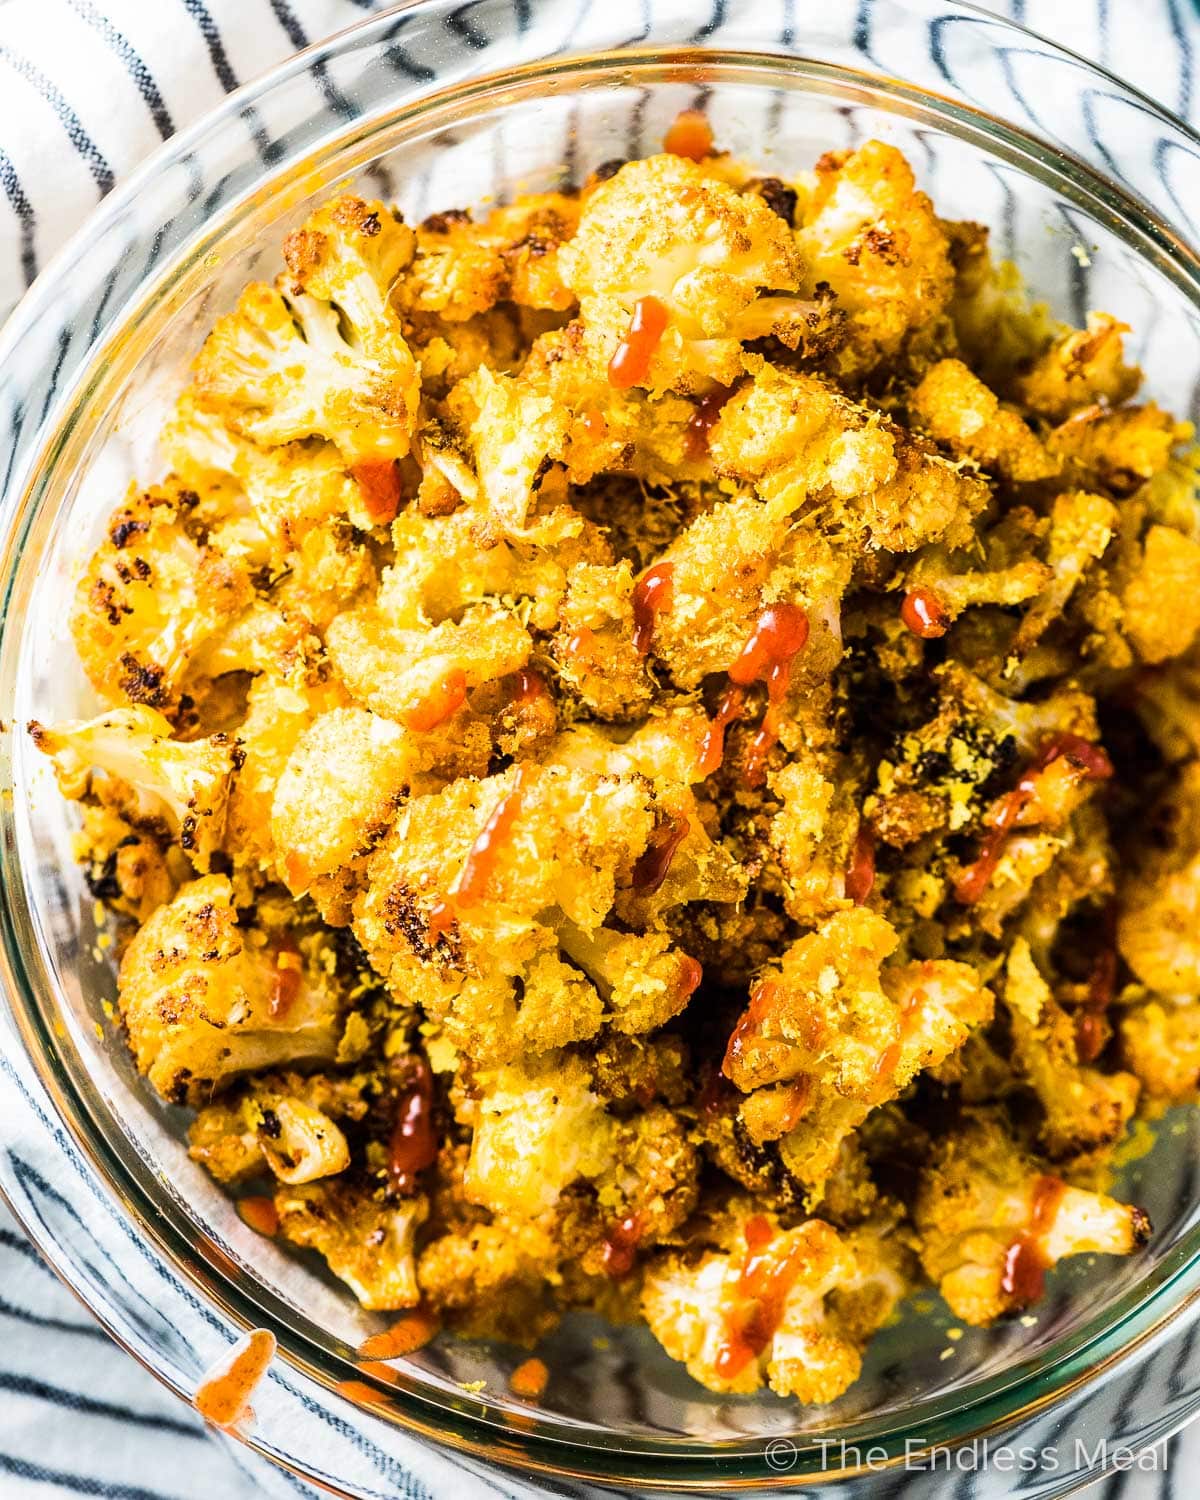 Cauliflower popcorn in a glass bowl with a little sriracha over the top.